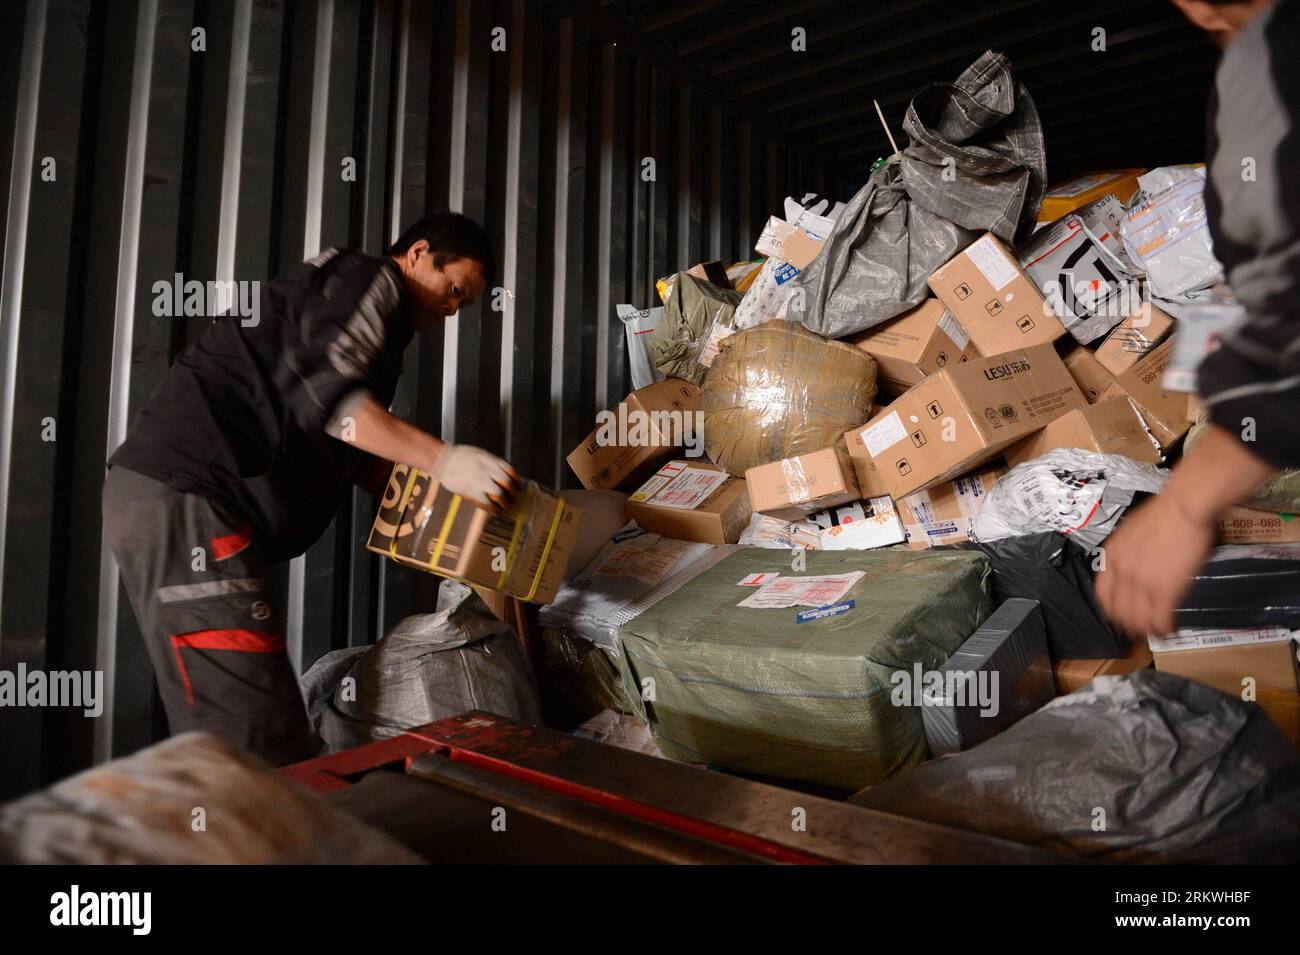 Bildnummer: 58691497  Datum: 12.11.2012  Copyright: imago/Xinhua (121112) -- NANCHANG, Nov. 12, 2012 (Xinhua) -- Workers sort out piled-up packages at an express delivery company s sorting center in Nanchang, capital of east China s Jiangxi Province, Nov. 12, 2012. The Chinese grassroots self-proclaimed Singles Day, which falls on November 11, has become a shopping festival under a continuous sales promotion of e-business groups. Great discounts resulted in a sharp increase of online trades which cause enormous pressure on express service.(Xinhua/Zhou Mi) (wjq) CHINA-JIANGXI-SINGLE S DAY-EXPRE Stock Photo